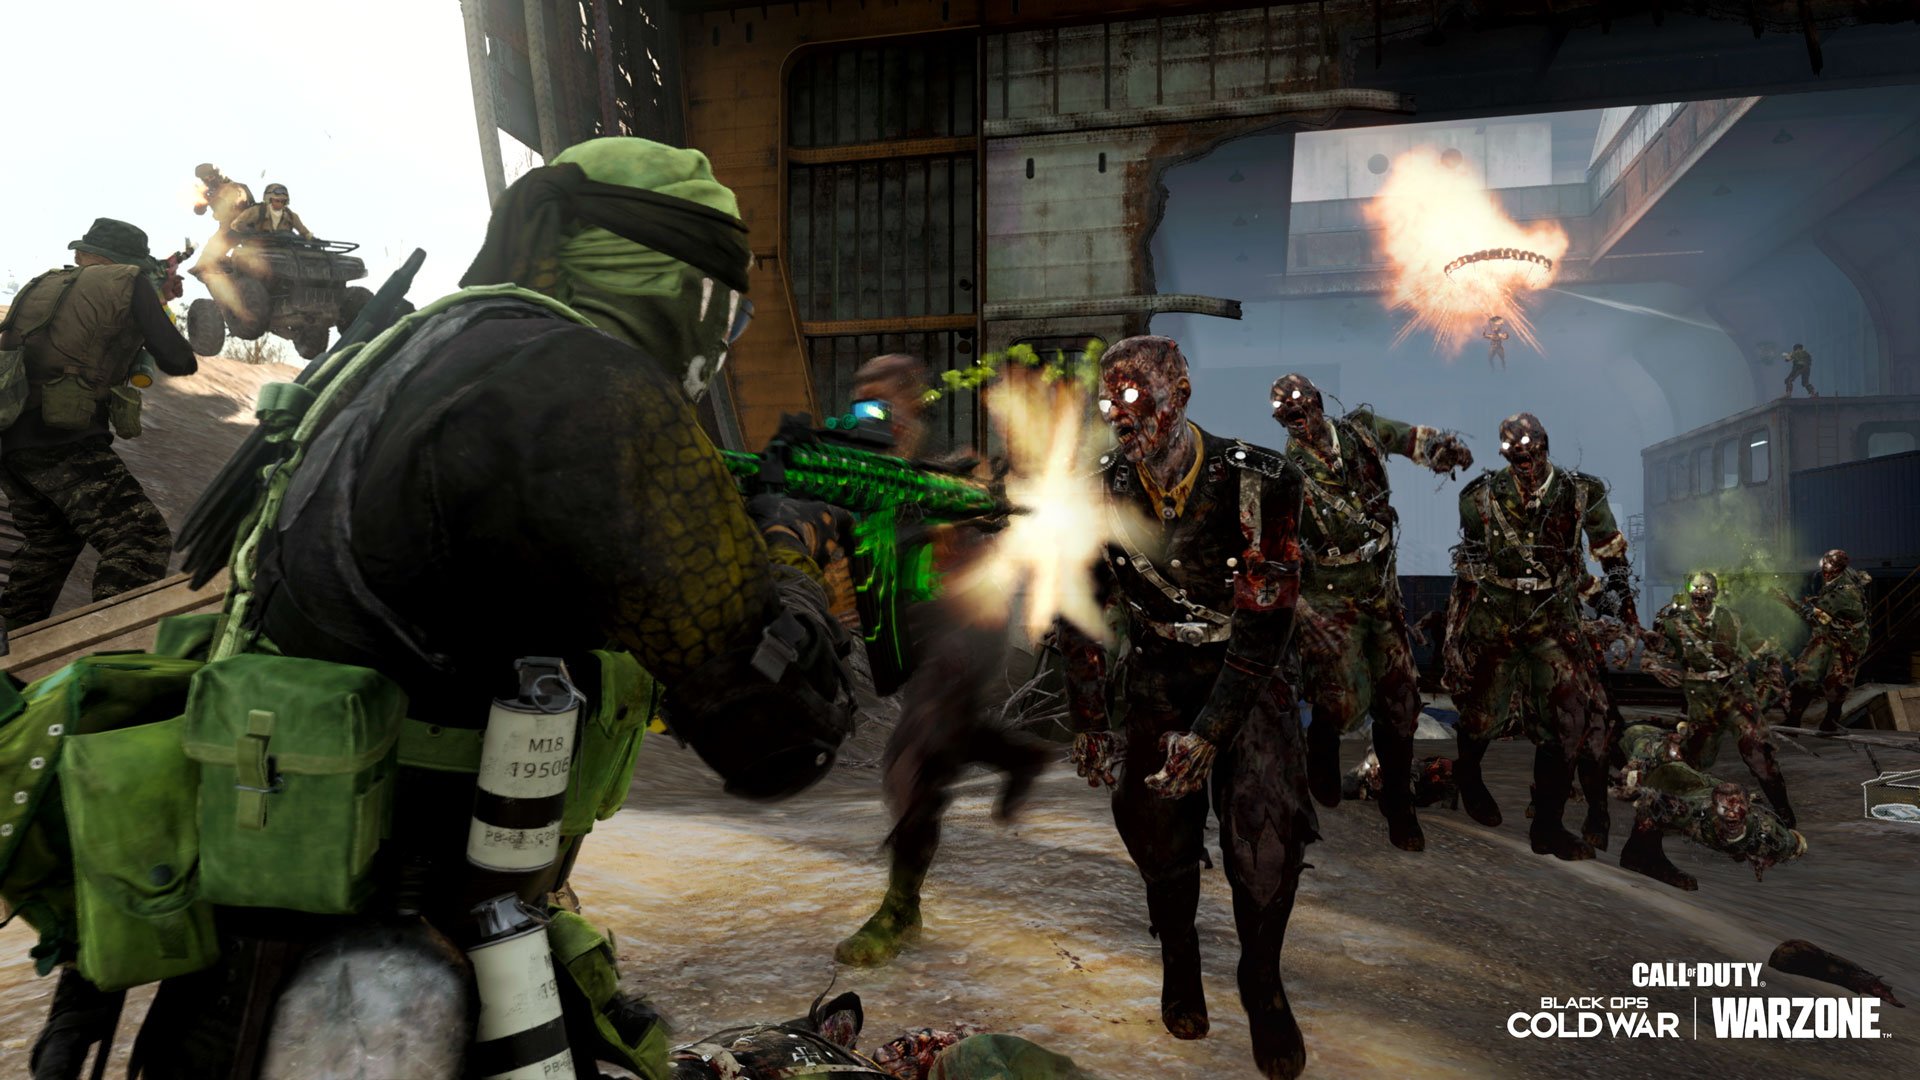 Warzone’s zombies